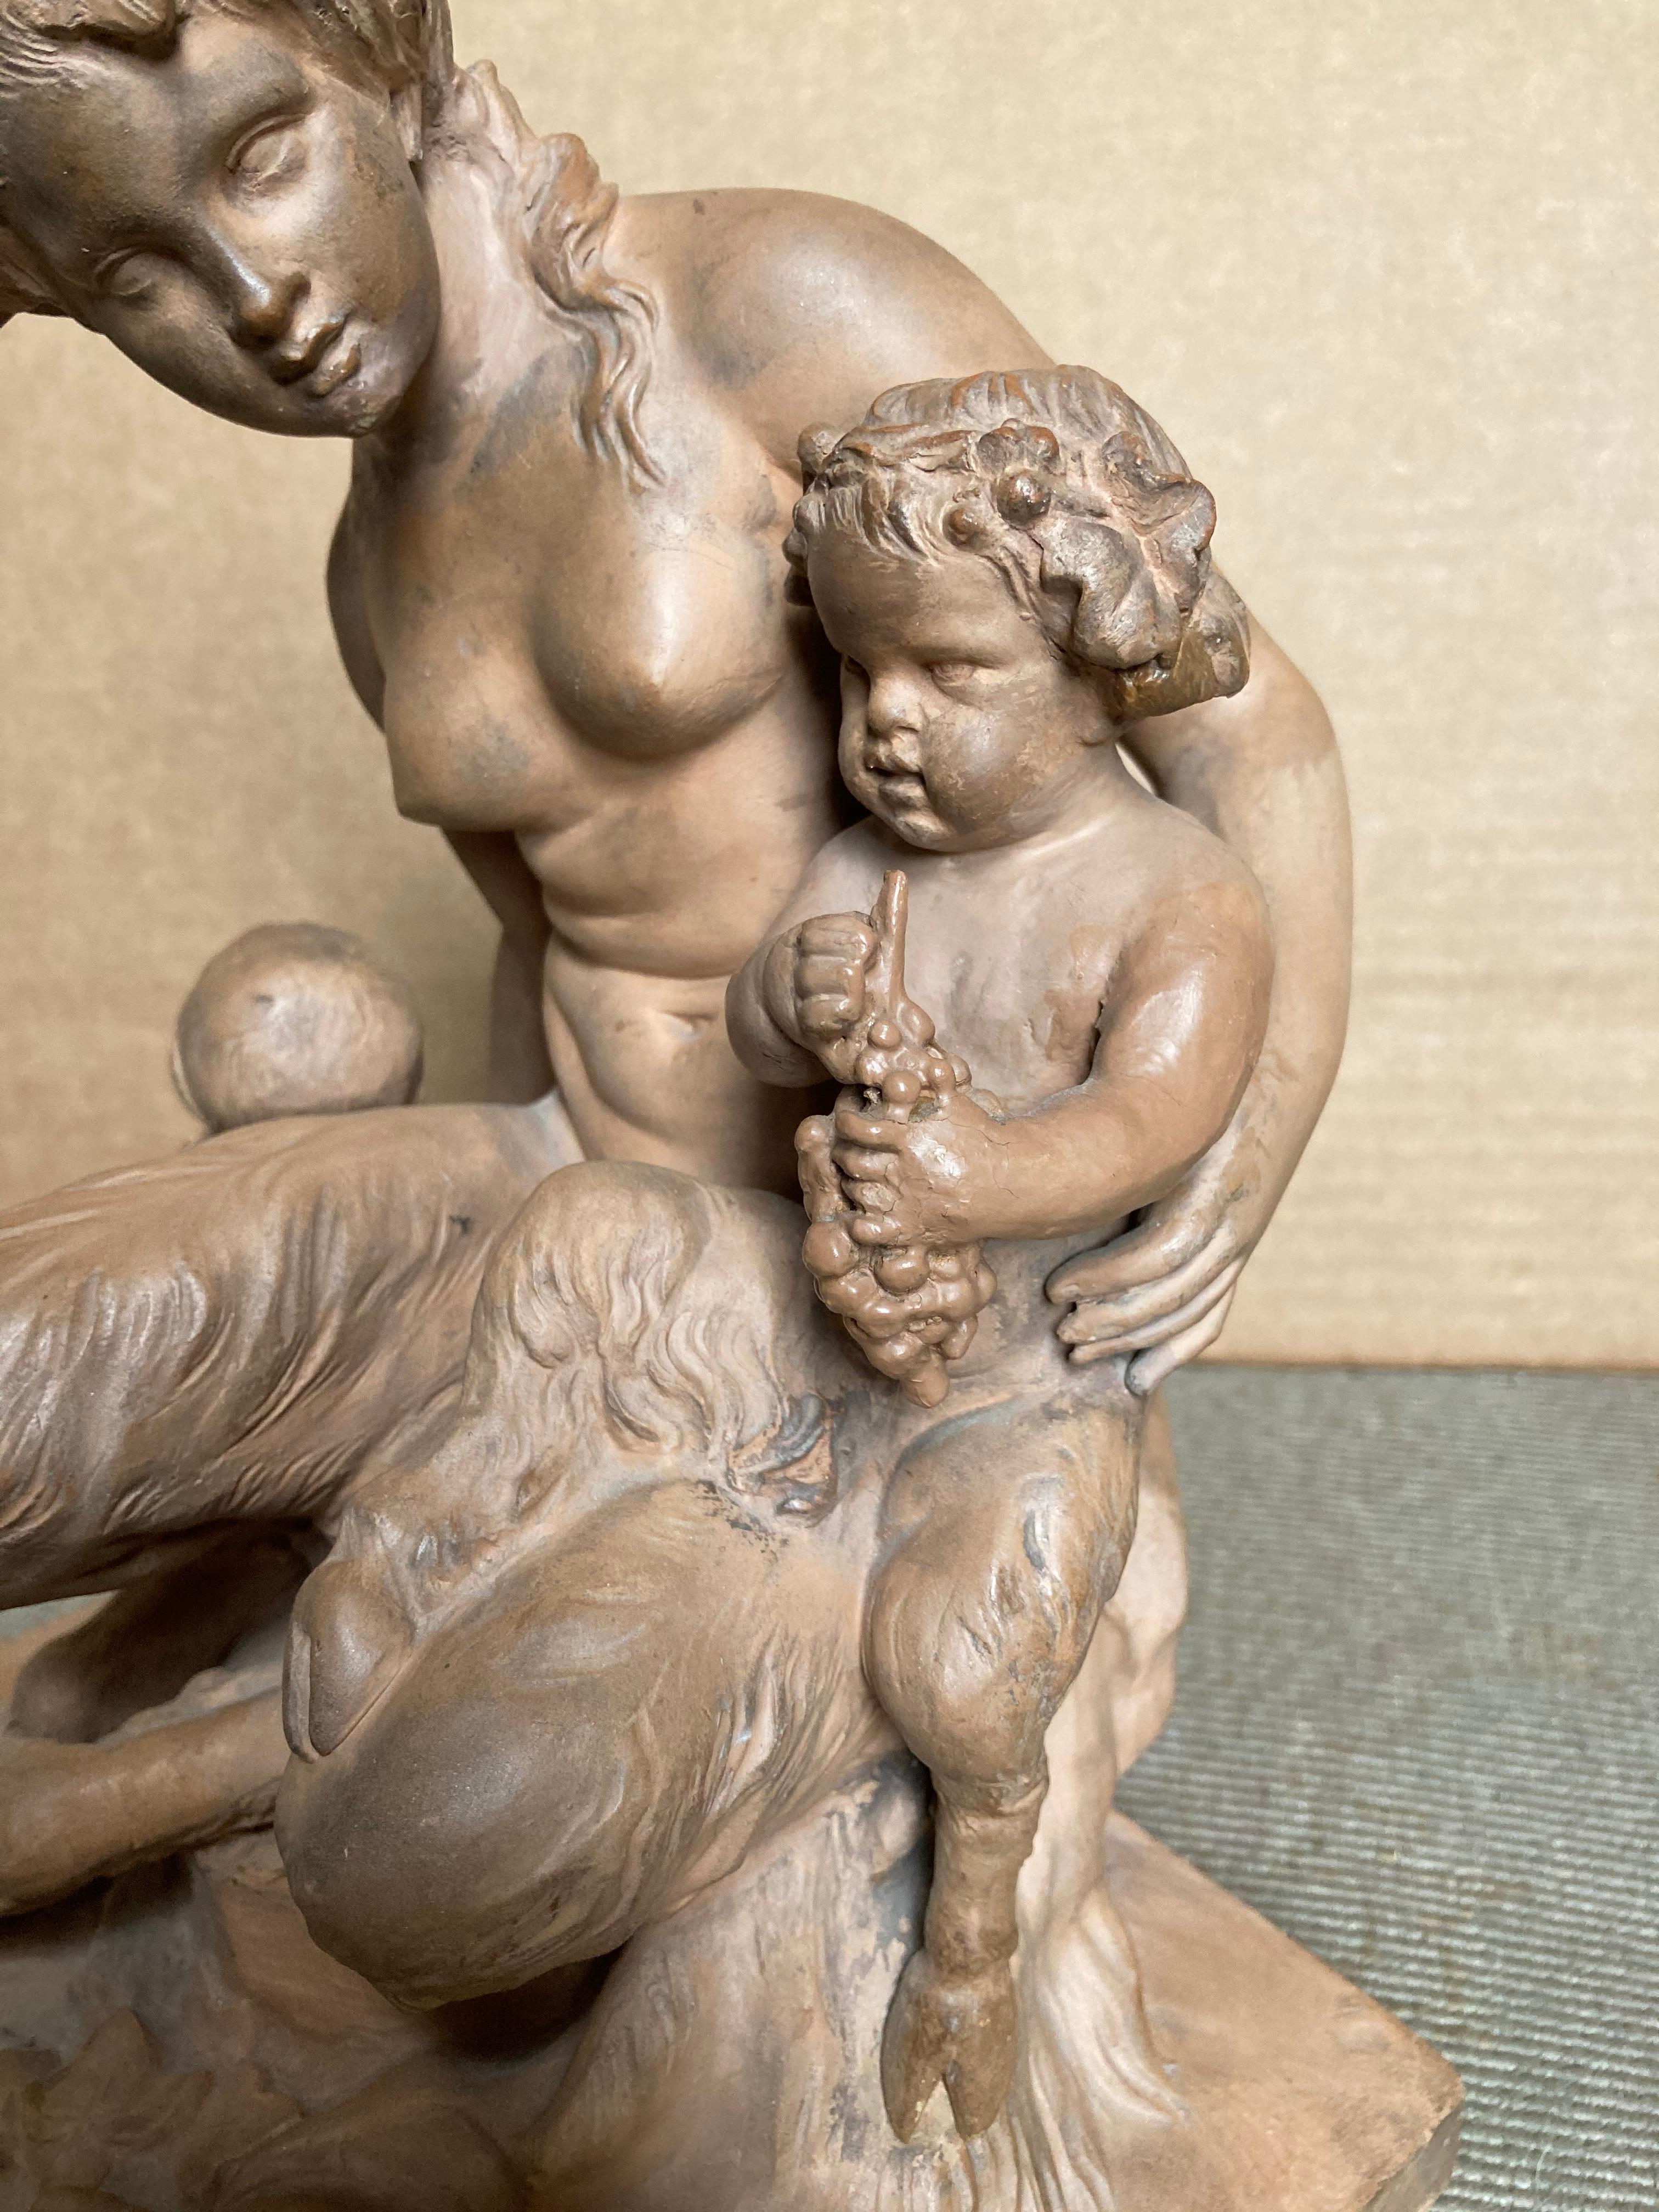 Talk about a conversation piece! A beautifully-wrought sculptural group of a mother satyr with her two children - yes, complete with their hairy legs and hooves! Of course this goes back to the Romans so it's an entirely classical subject, despite